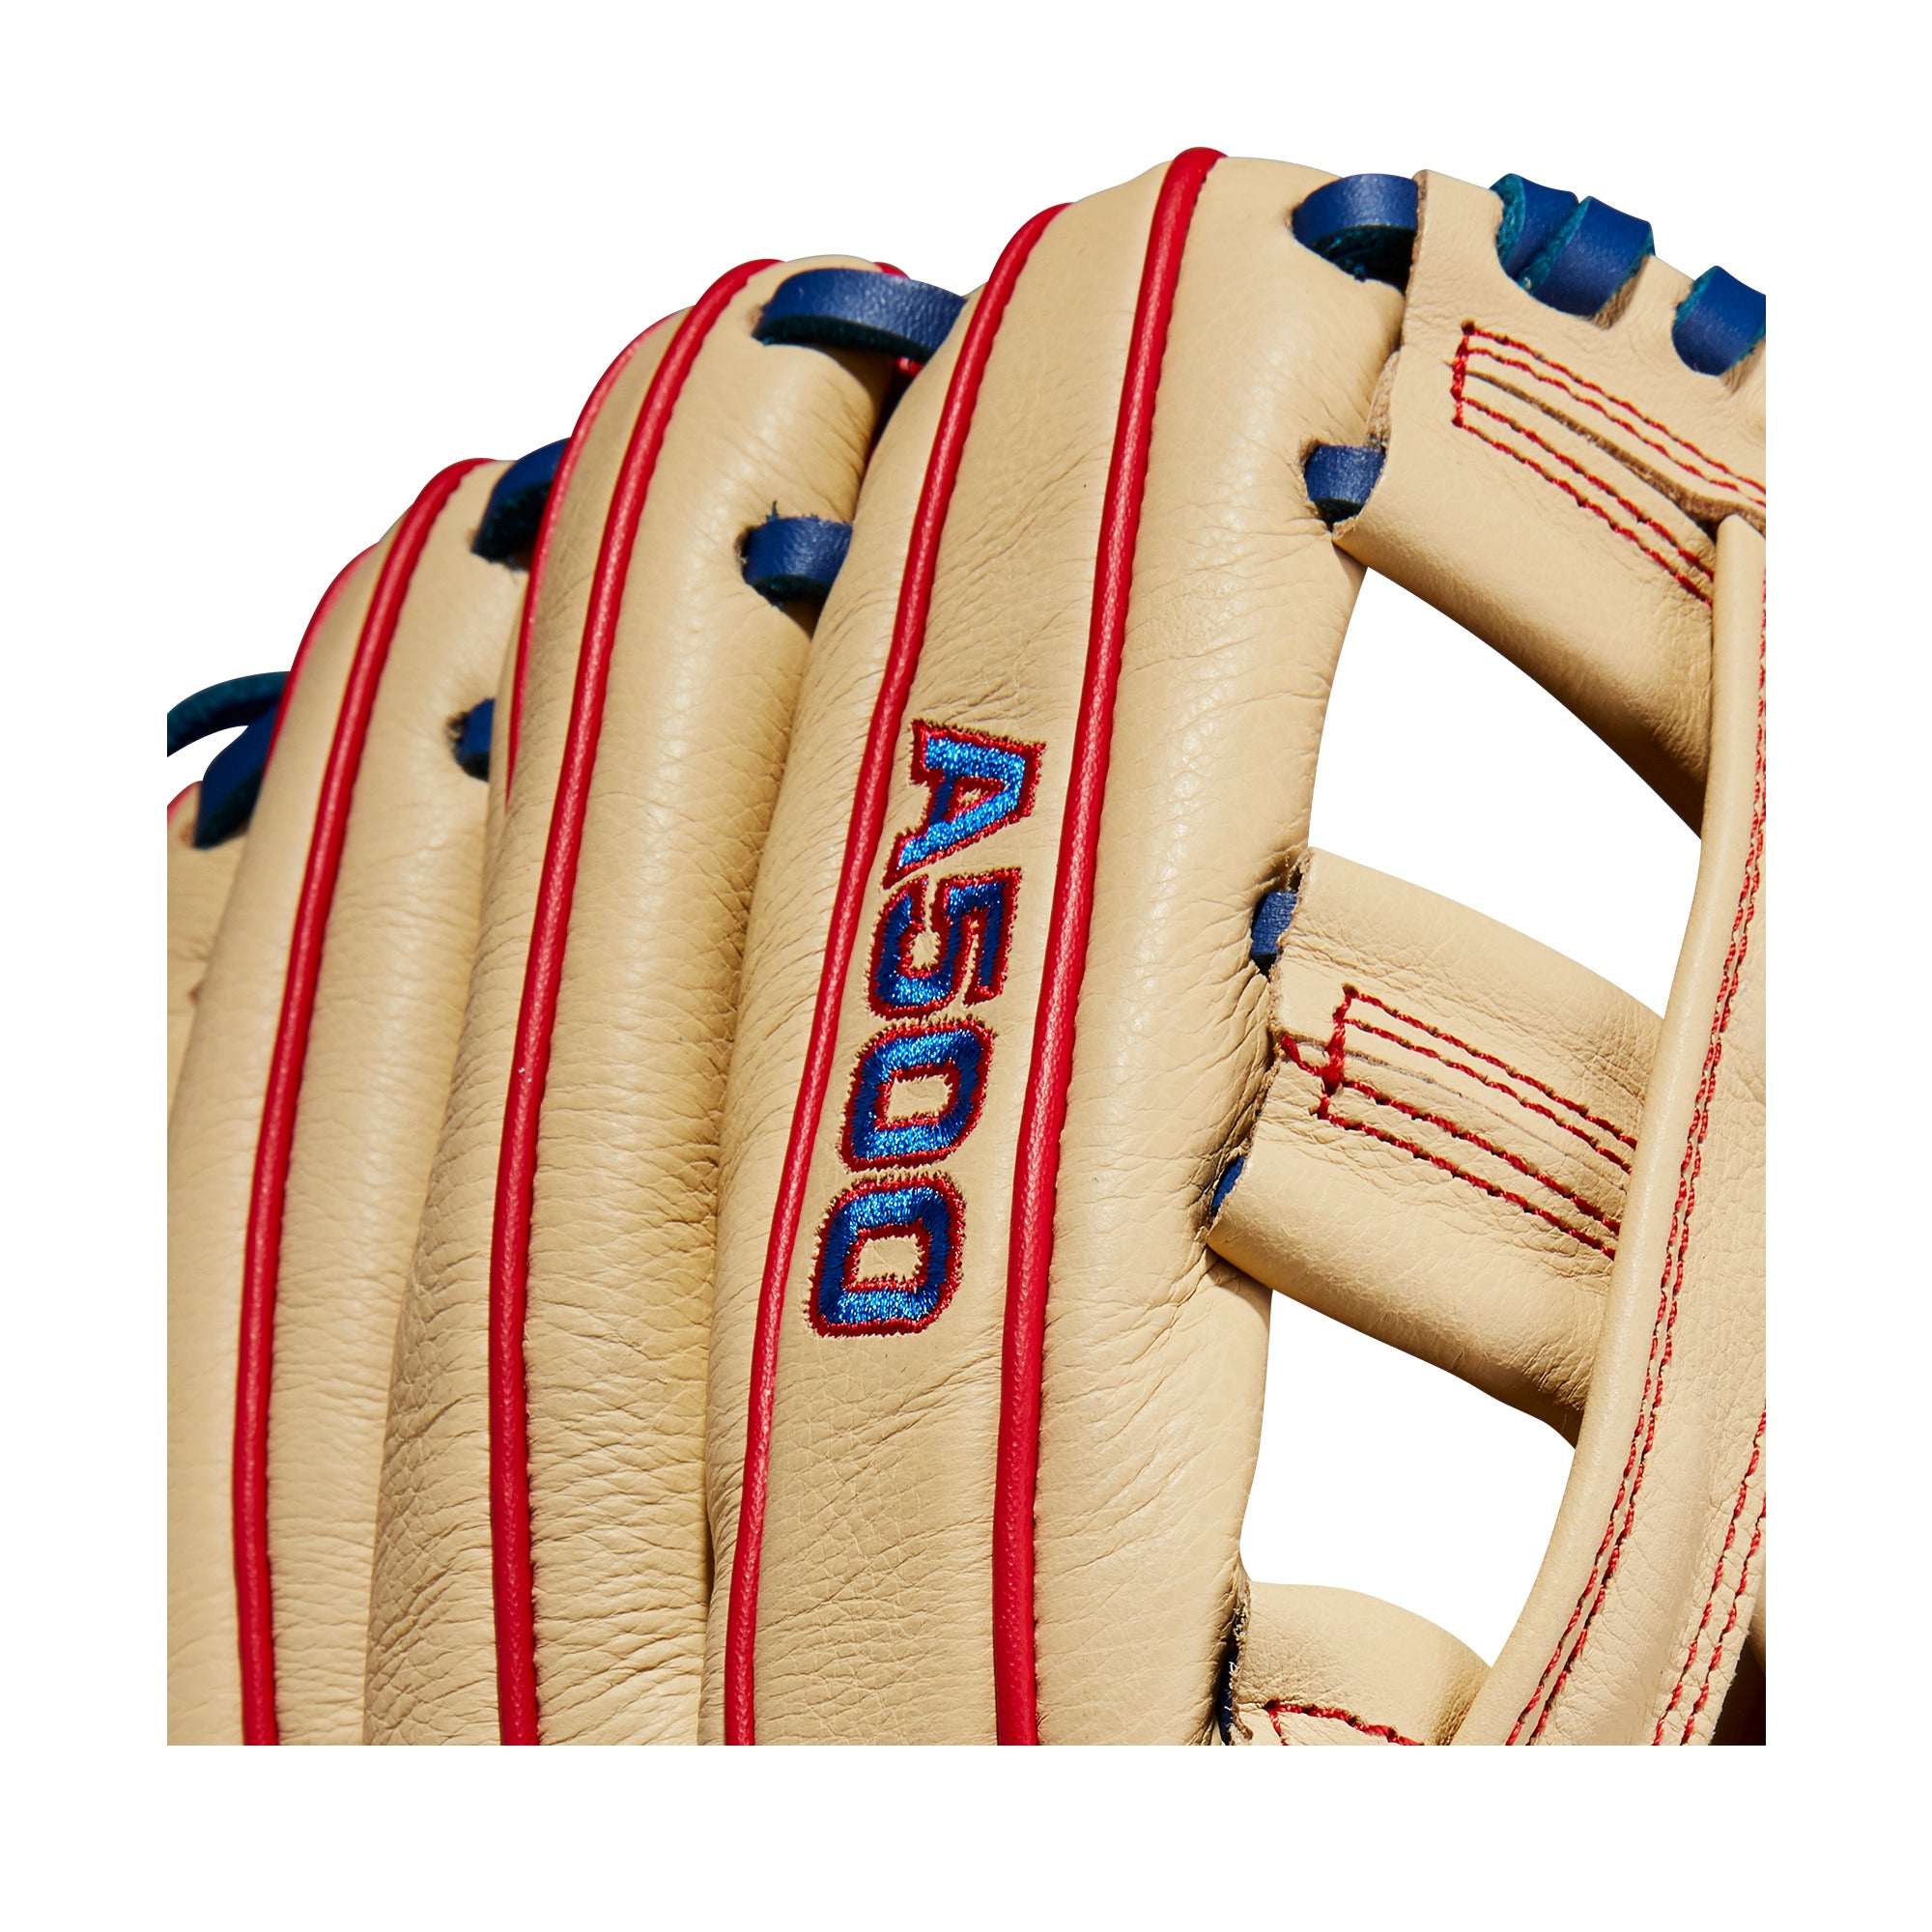 Wilson A500 12-inch Utility Youth Baseball Glove Blonde/Red/Royal